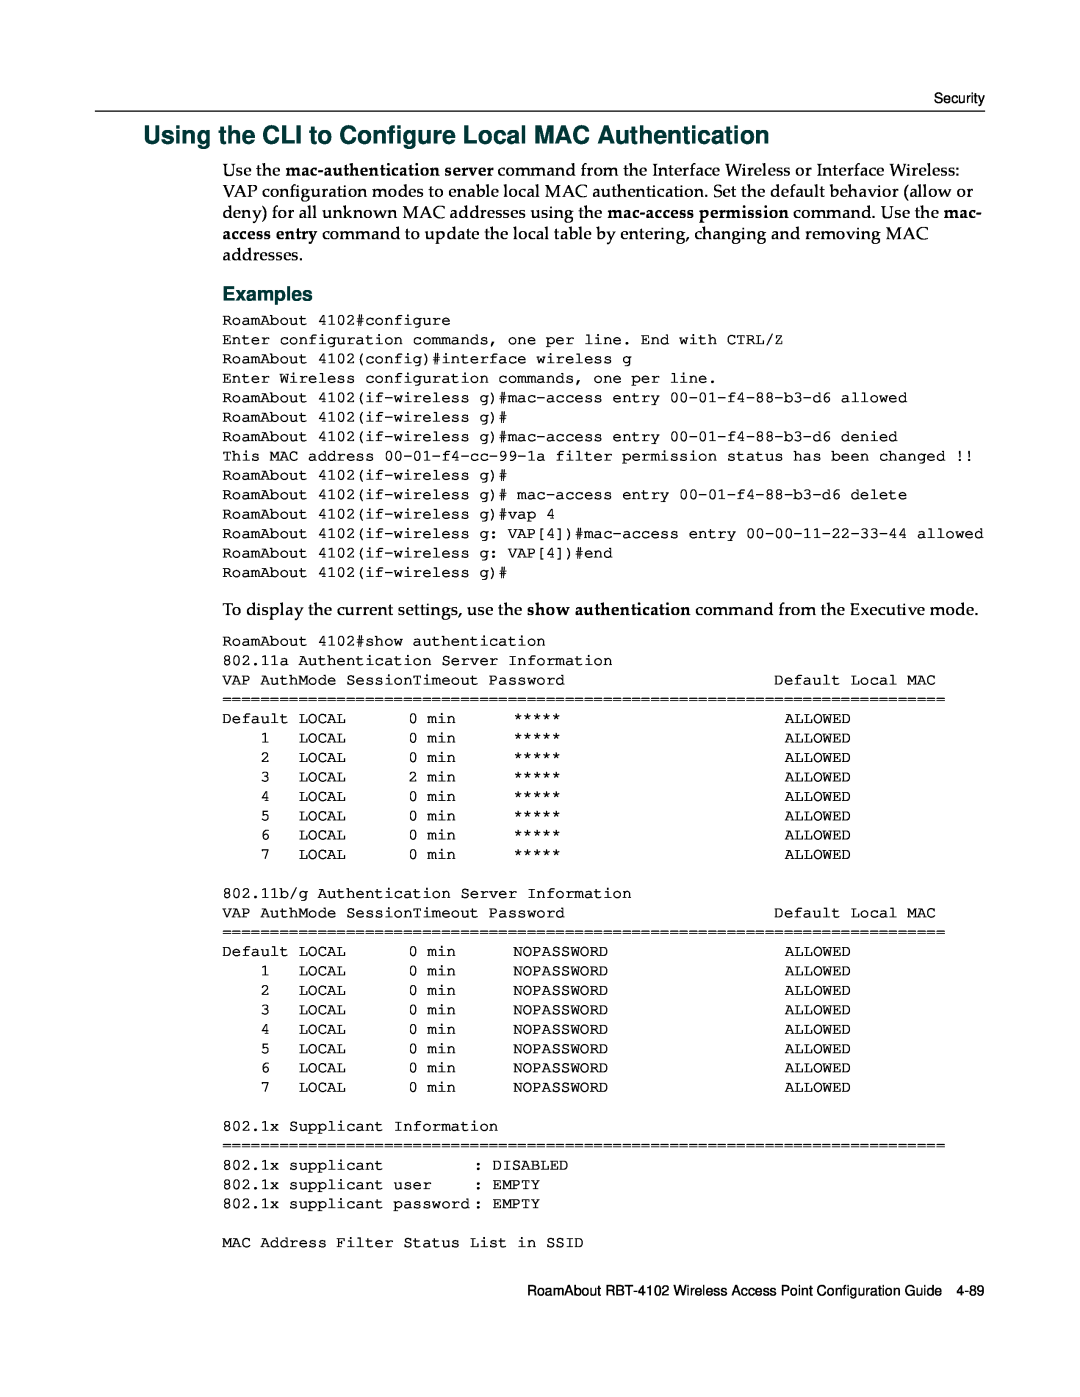 Enterasys Networks RBT-4102 manual Using the CLI to Configure Local MAC Authentication, Examples 